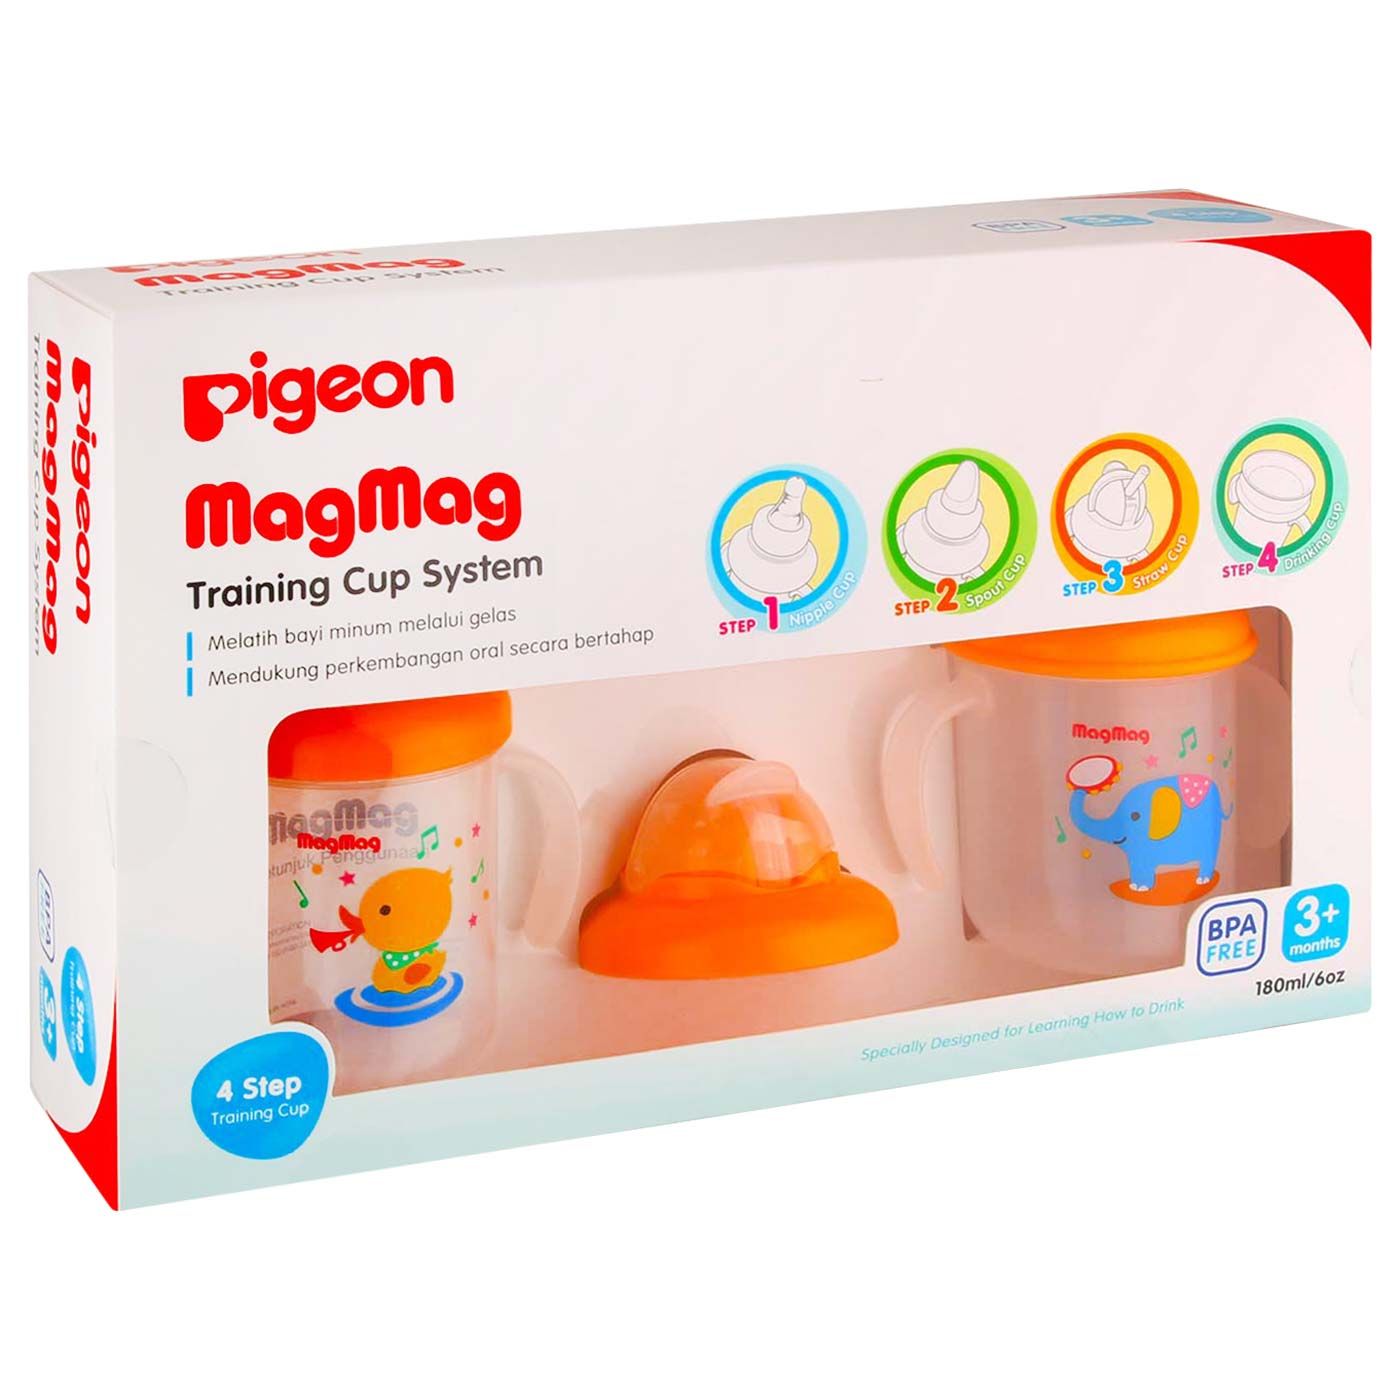 Pigeon Mag-Mag Training Cup System - 2